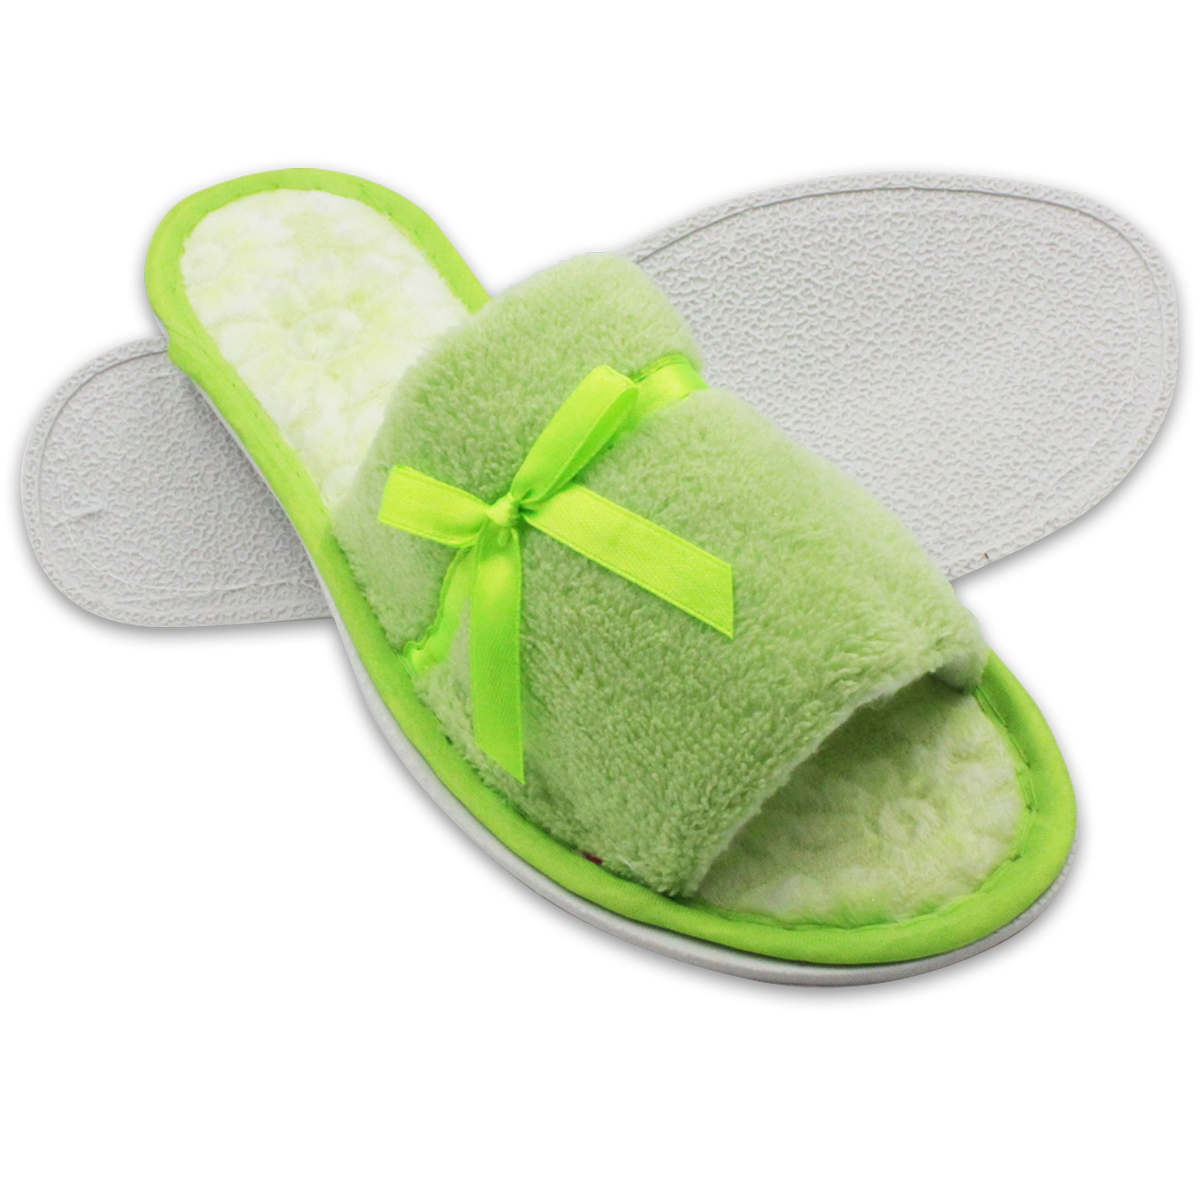 Buy > women's terry cloth house slippers > in stock